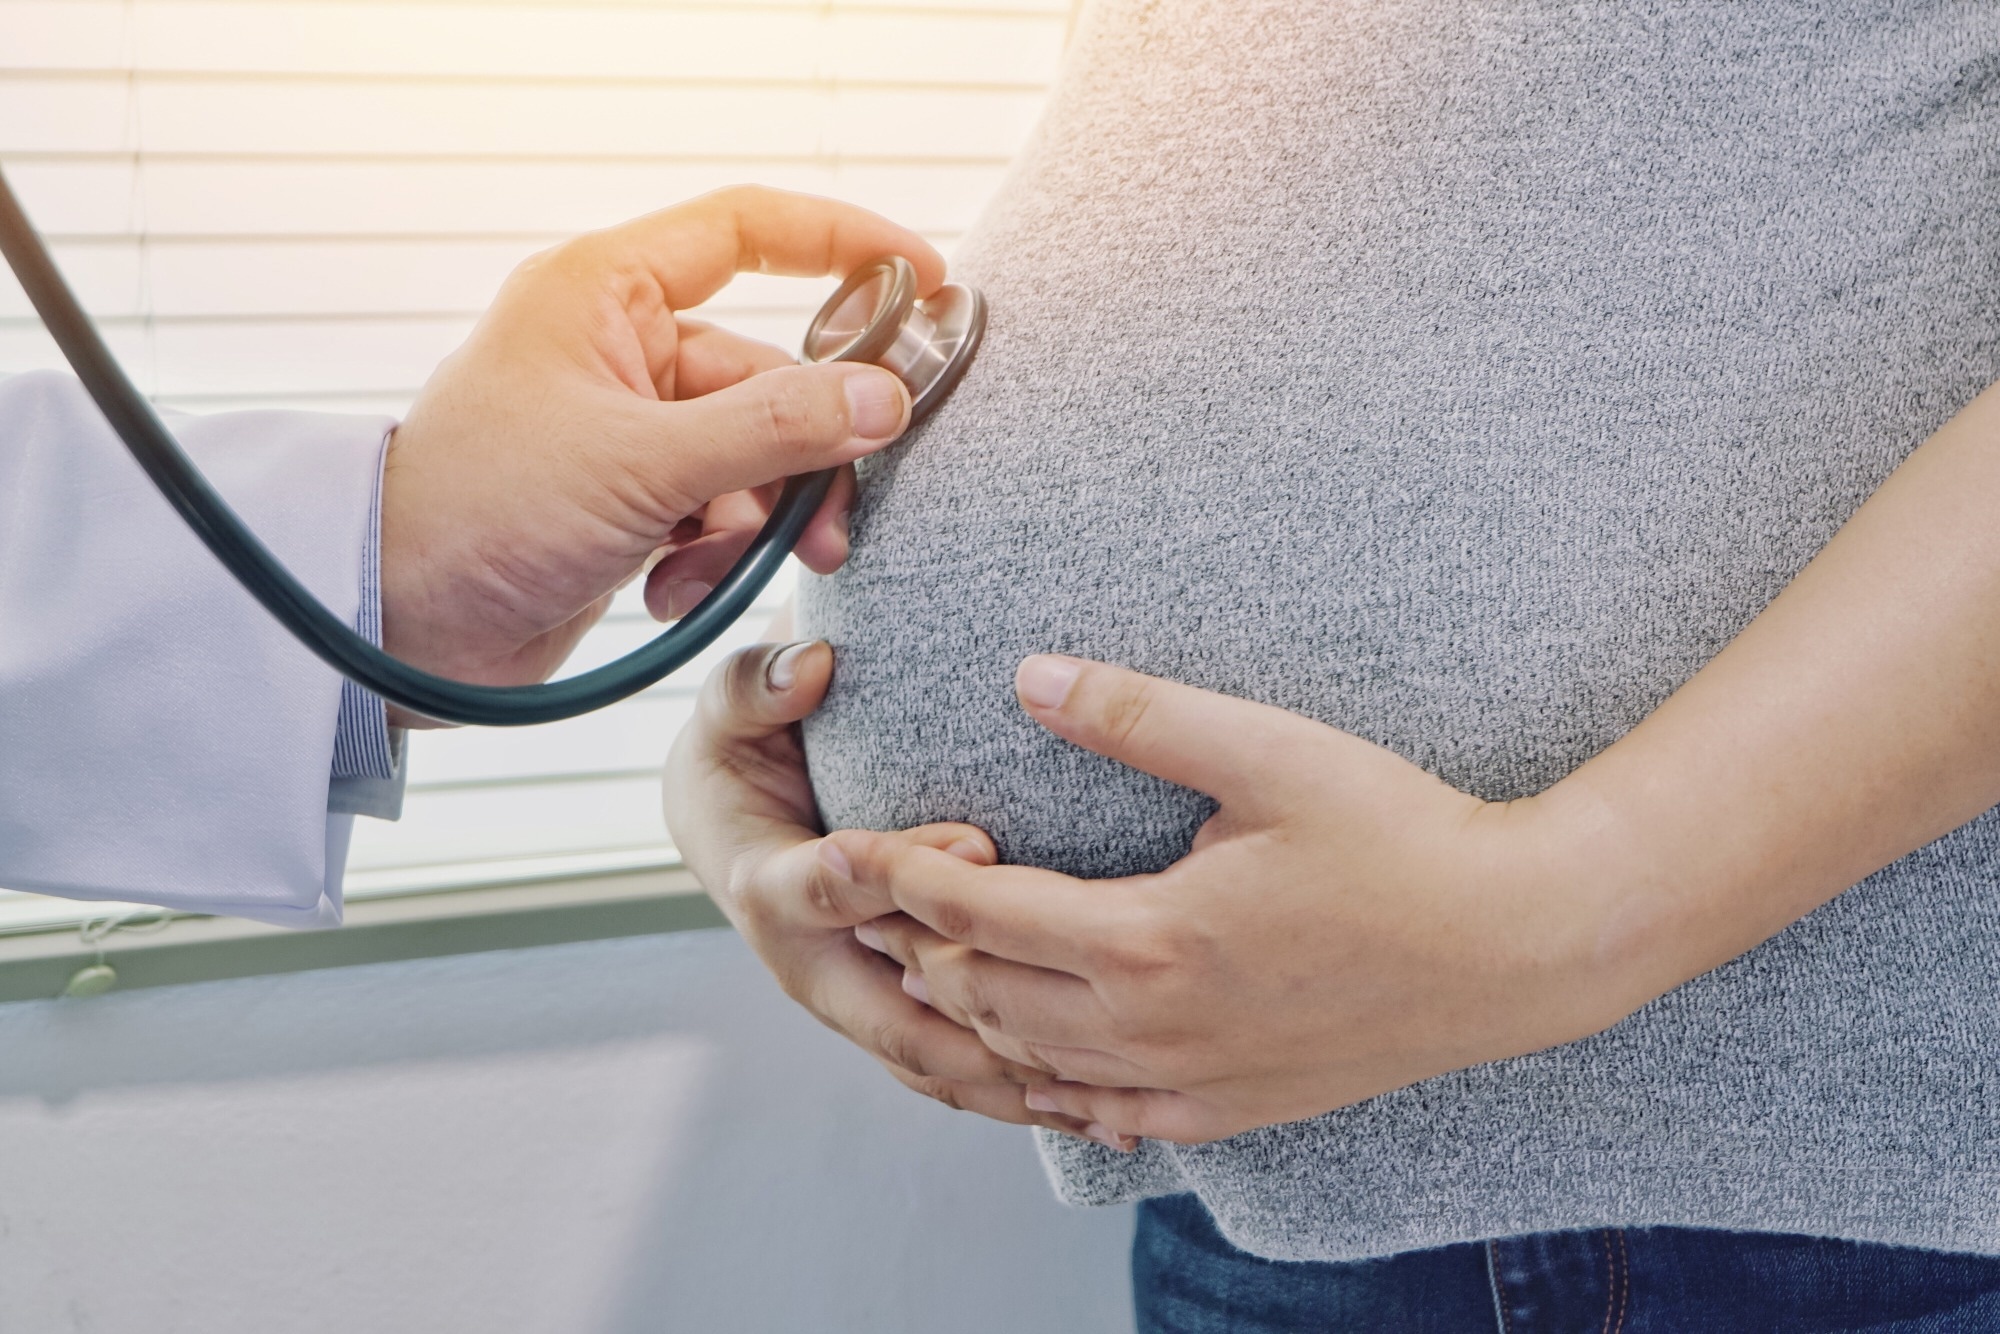 Study: Alcohol & cannabinoid co-use: Implications for impaired fetal brain development following gestational exposure. Image Credit: Primeiya/Shutterstock